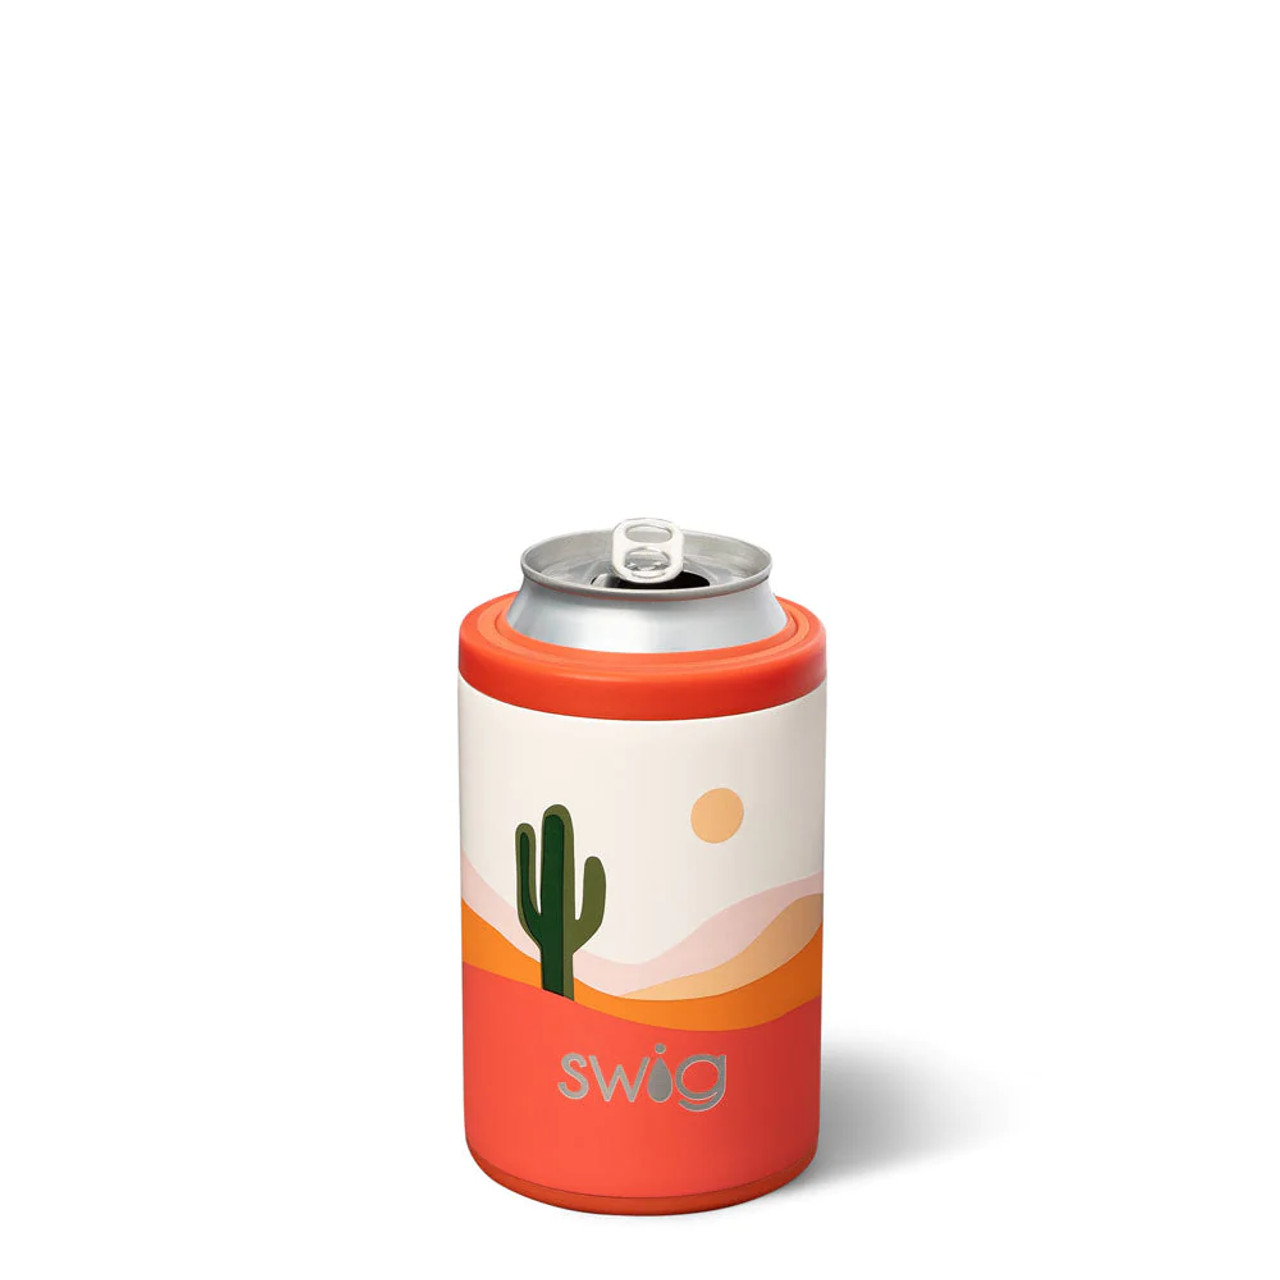 https://cdn11.bigcommerce.com/s-e3nb6xi/images/stencil/1280x1280/products/25246/126921/swig-life-signature-12oz-insulated-stainless-steel-can-bottle-cooler-boho-desert-main_61ce92ef-ade6-4c8d-8963-17f4dbf98e7e__90565.1689104153.jpg?c=2